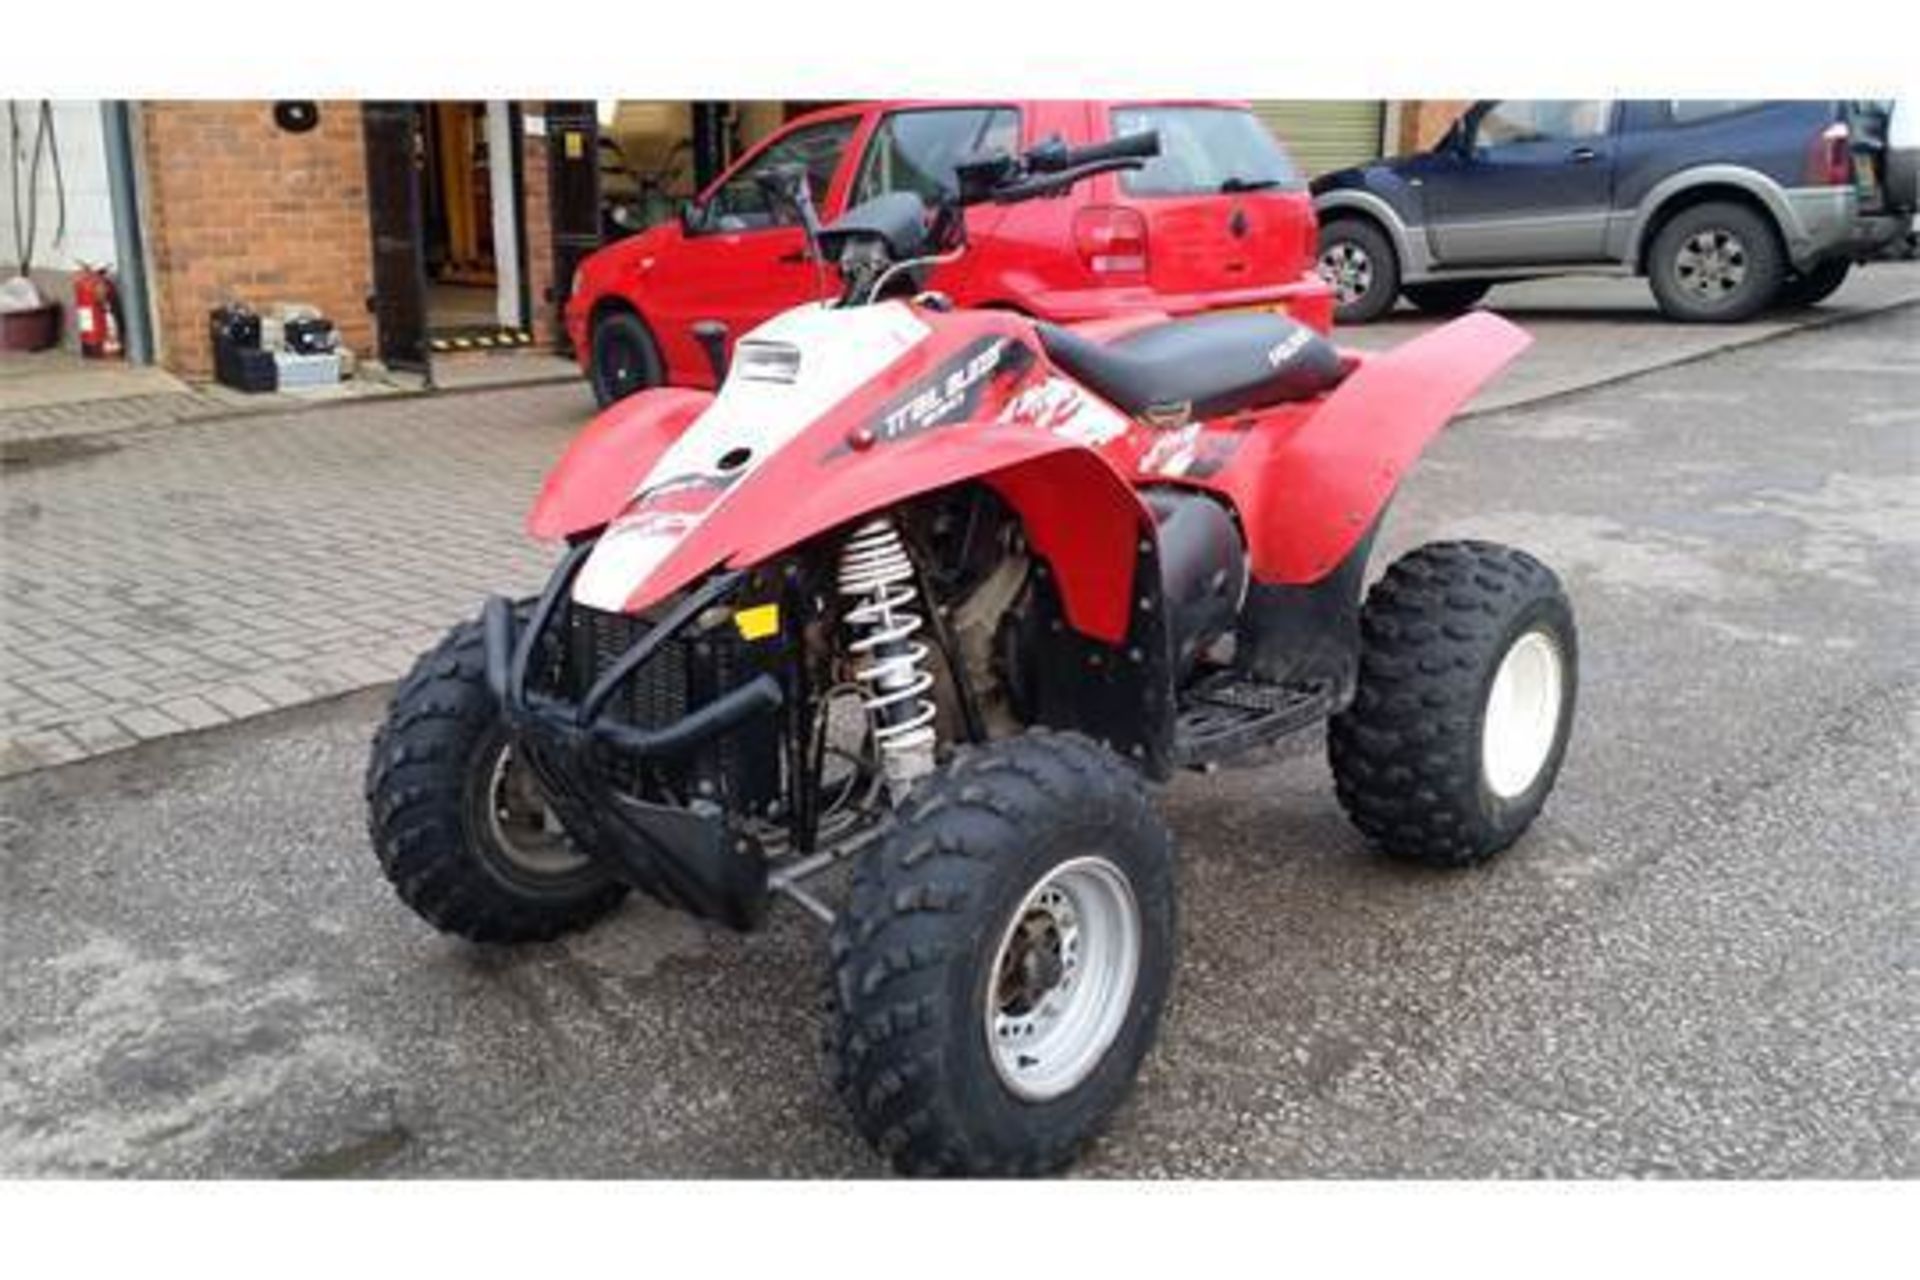 Polaris 330 Trail Blazer NO VAT Year 2002 Electric start Fully serviced Original tool kit Delivery - Image 2 of 6